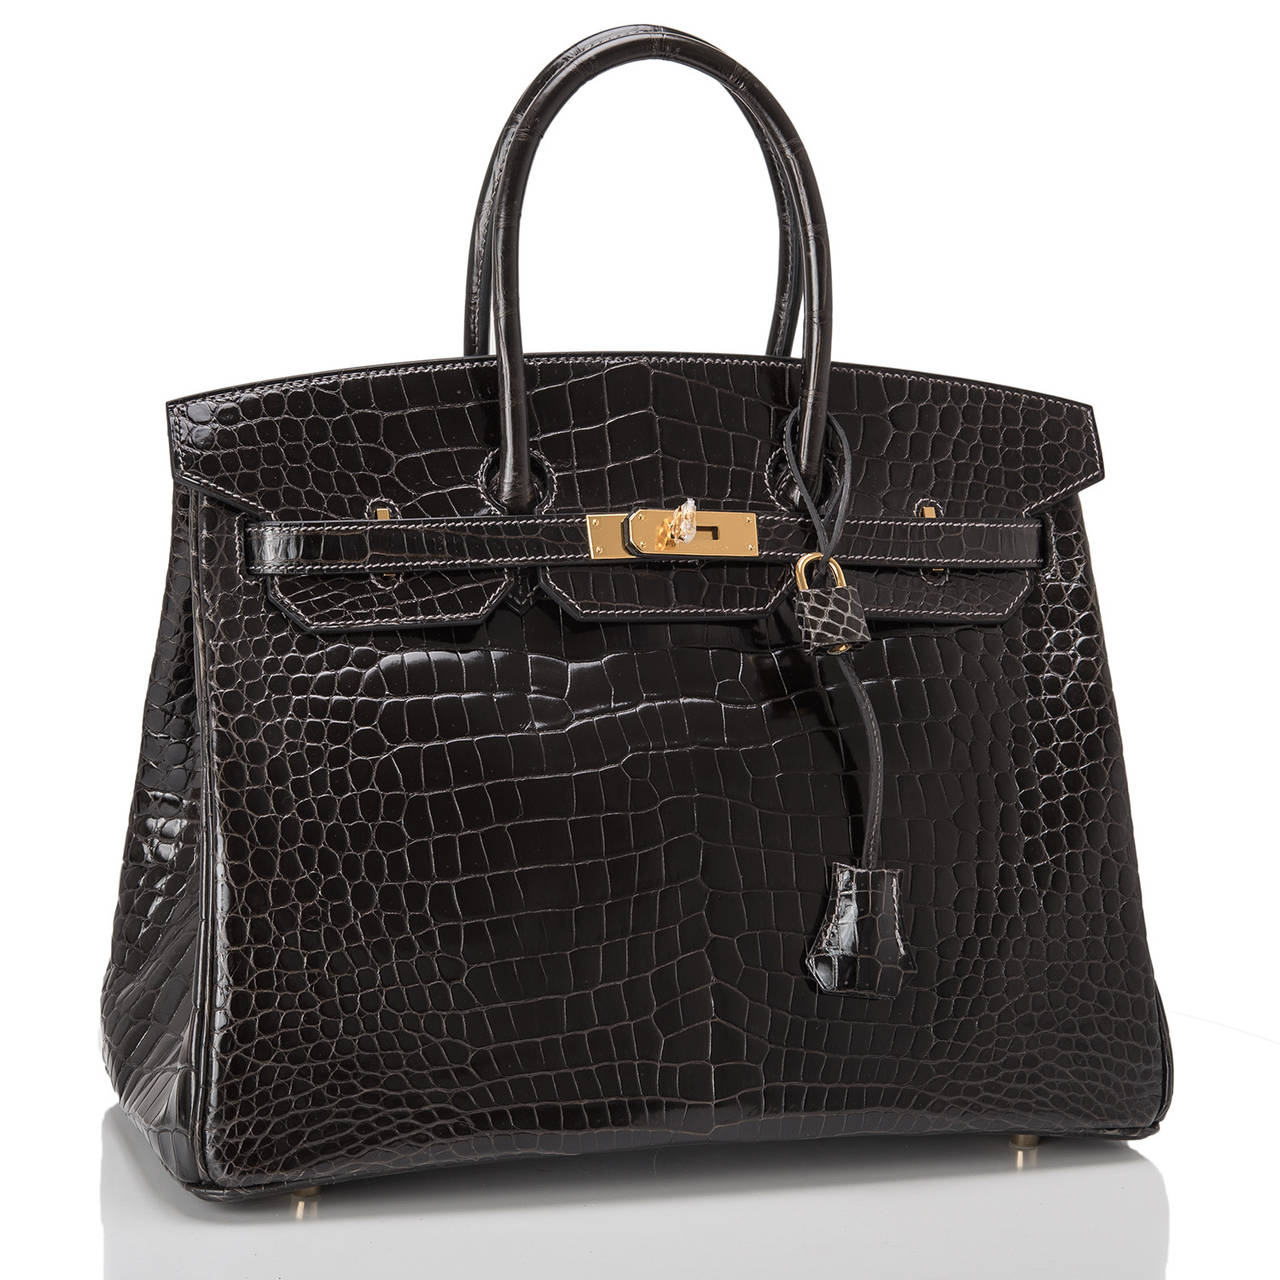 Hermes Graphite Birkin 35cm in Porosus crocodile with gold hardware.

This Birkin features tonal stitching, front toggle closure, clochette with lock and two keys, and double rolled handles. The interior is lined in Graphite chevre with one zip